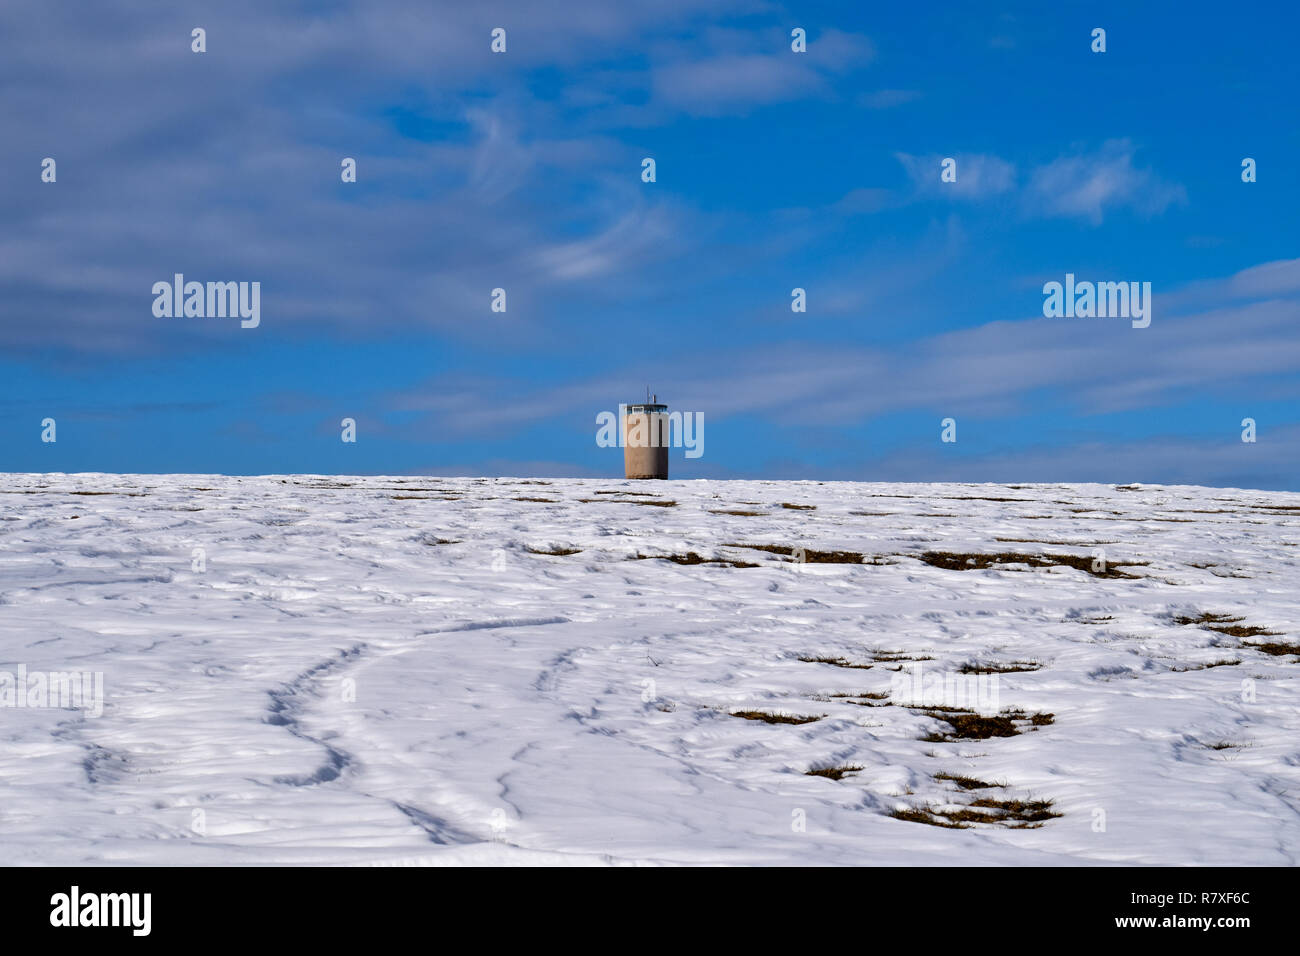 Winter landscape with snowy field Stock Photo